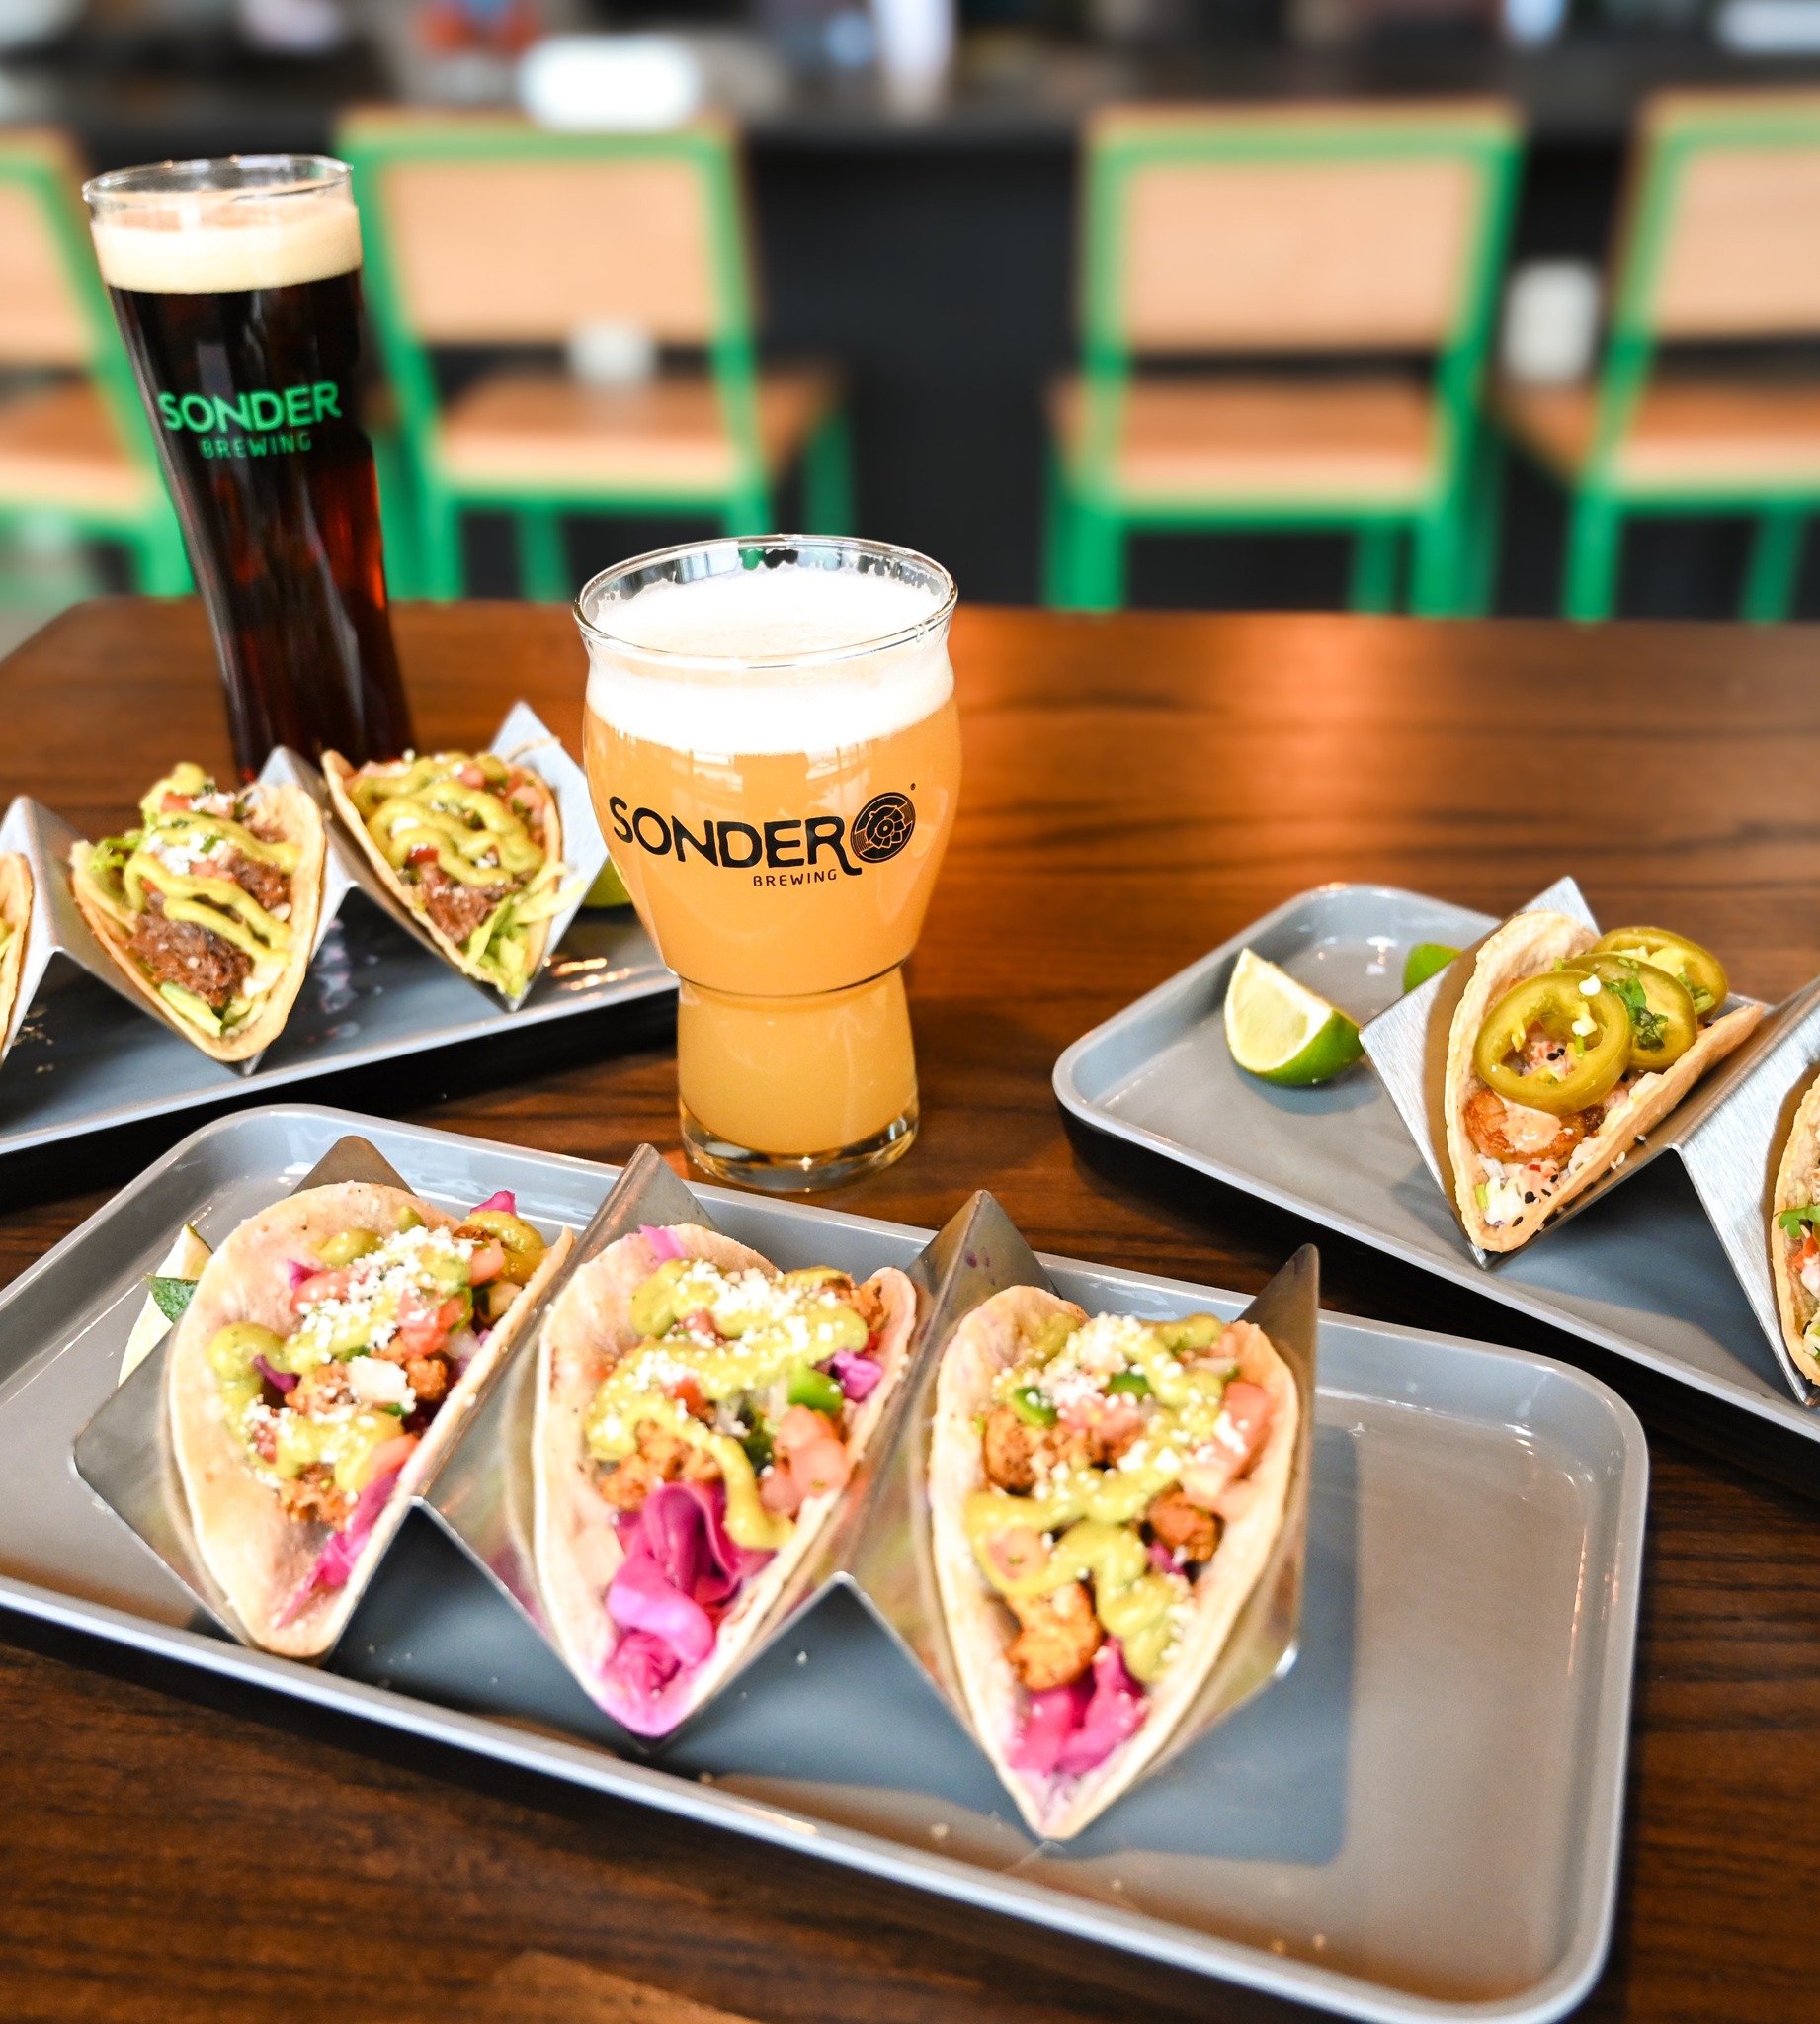 We've got you covered for Cinco De Mayo weekend! With three different types of tacos and Uniquely Crafted margaritas or beer, we have everything you'll need! 🌮

#SonderTaphaus #SonderBrewing #UniquelyCrafted